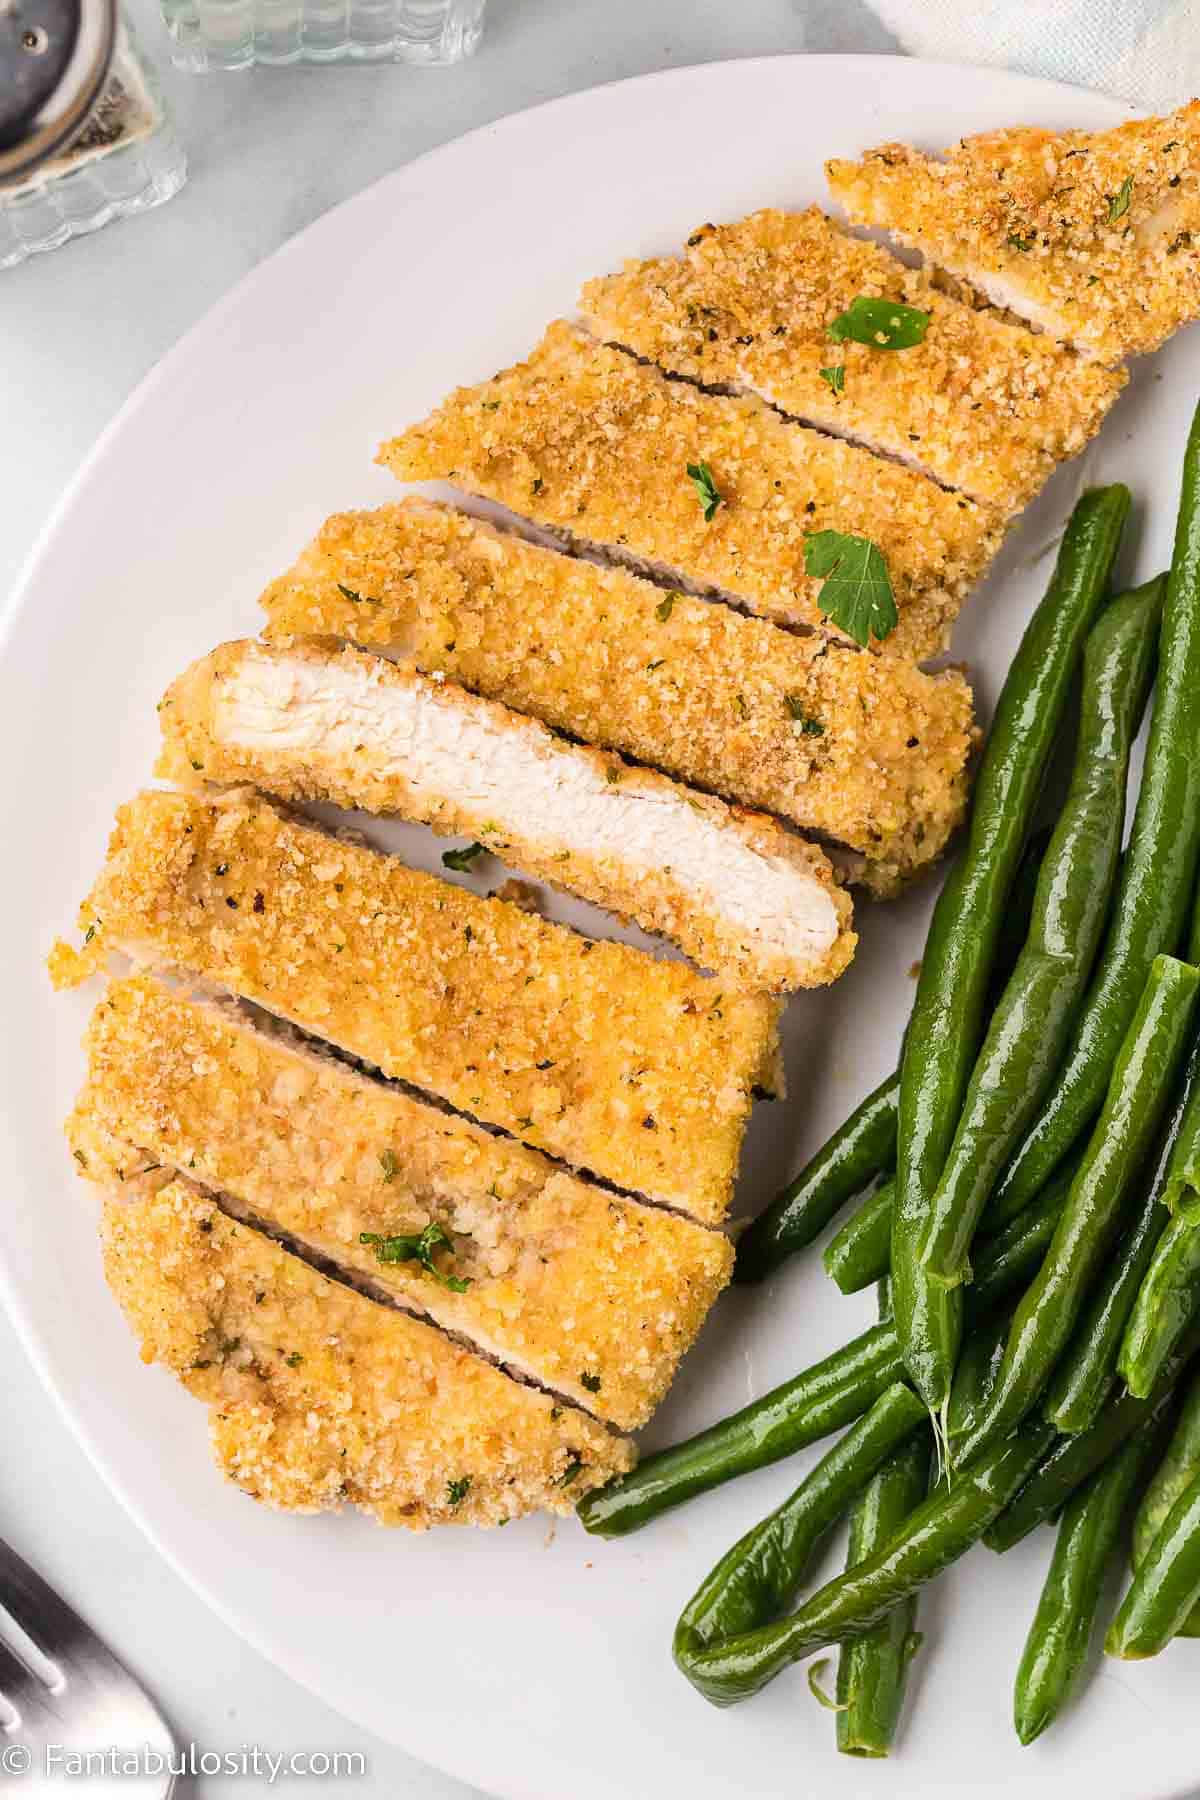 Baked chicken cutlet on white plate sitting next to green beans.